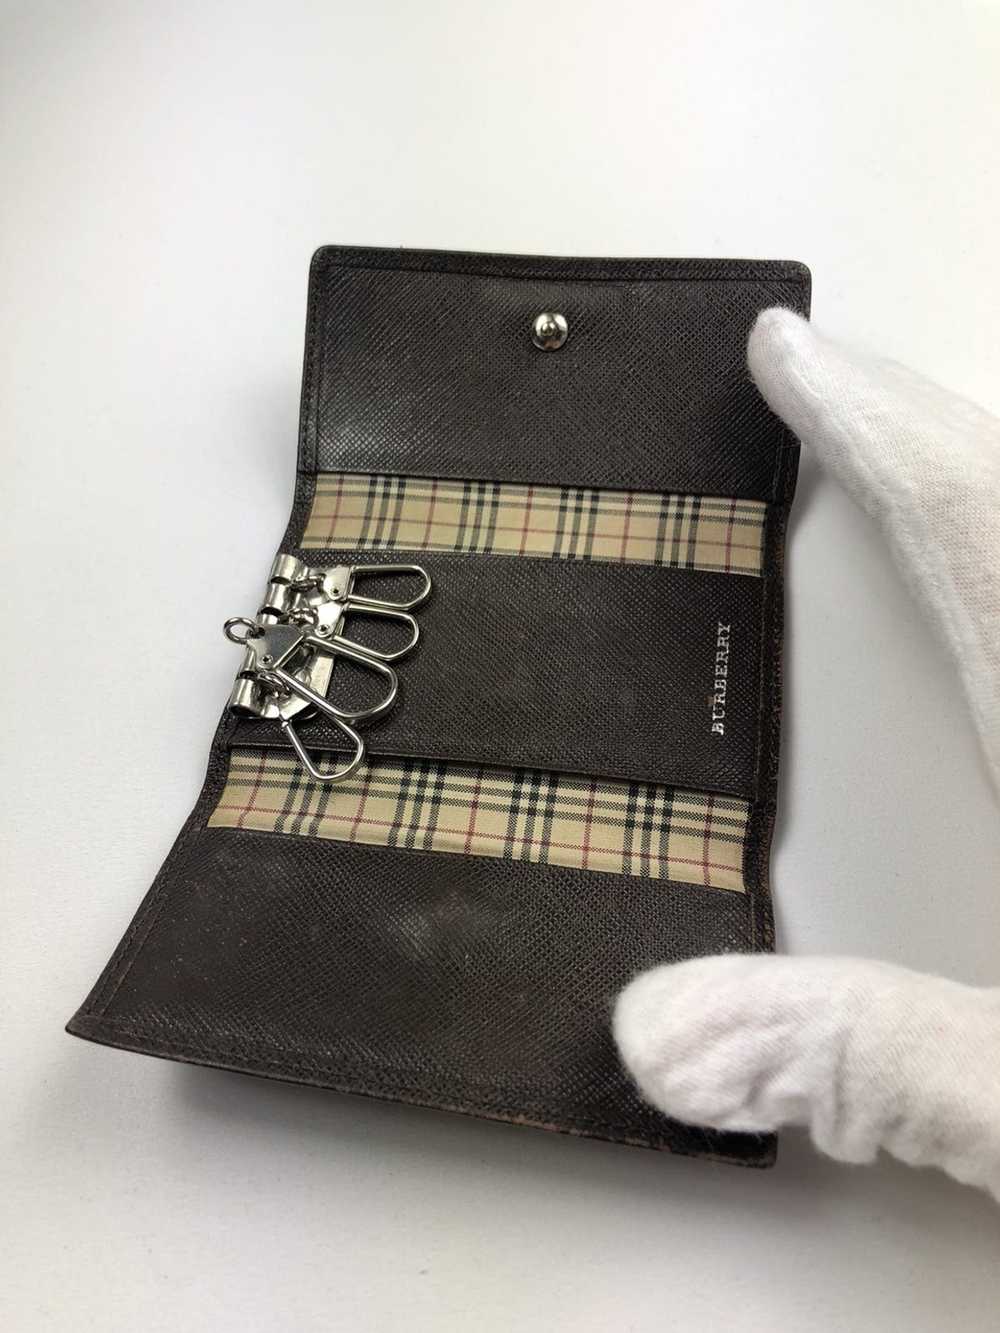 Burberry Burberry check leather key holder - image 3